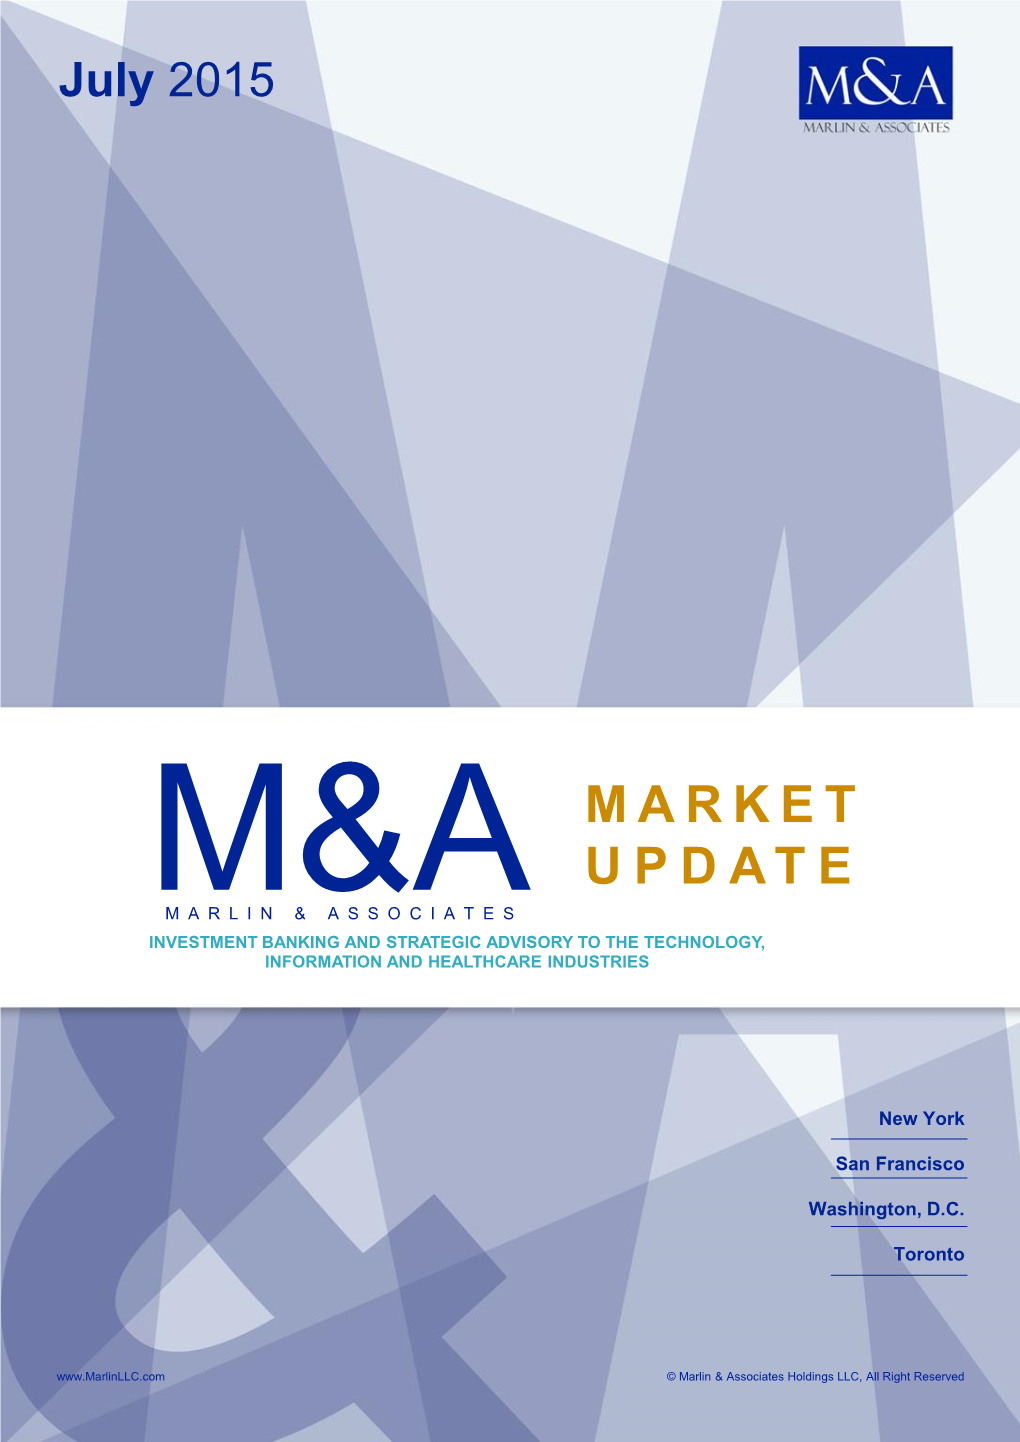 Market Update M&Amarlin & Associates Investment Banking and Strategic Advisory to the Technology, Information and Healthcare Industries